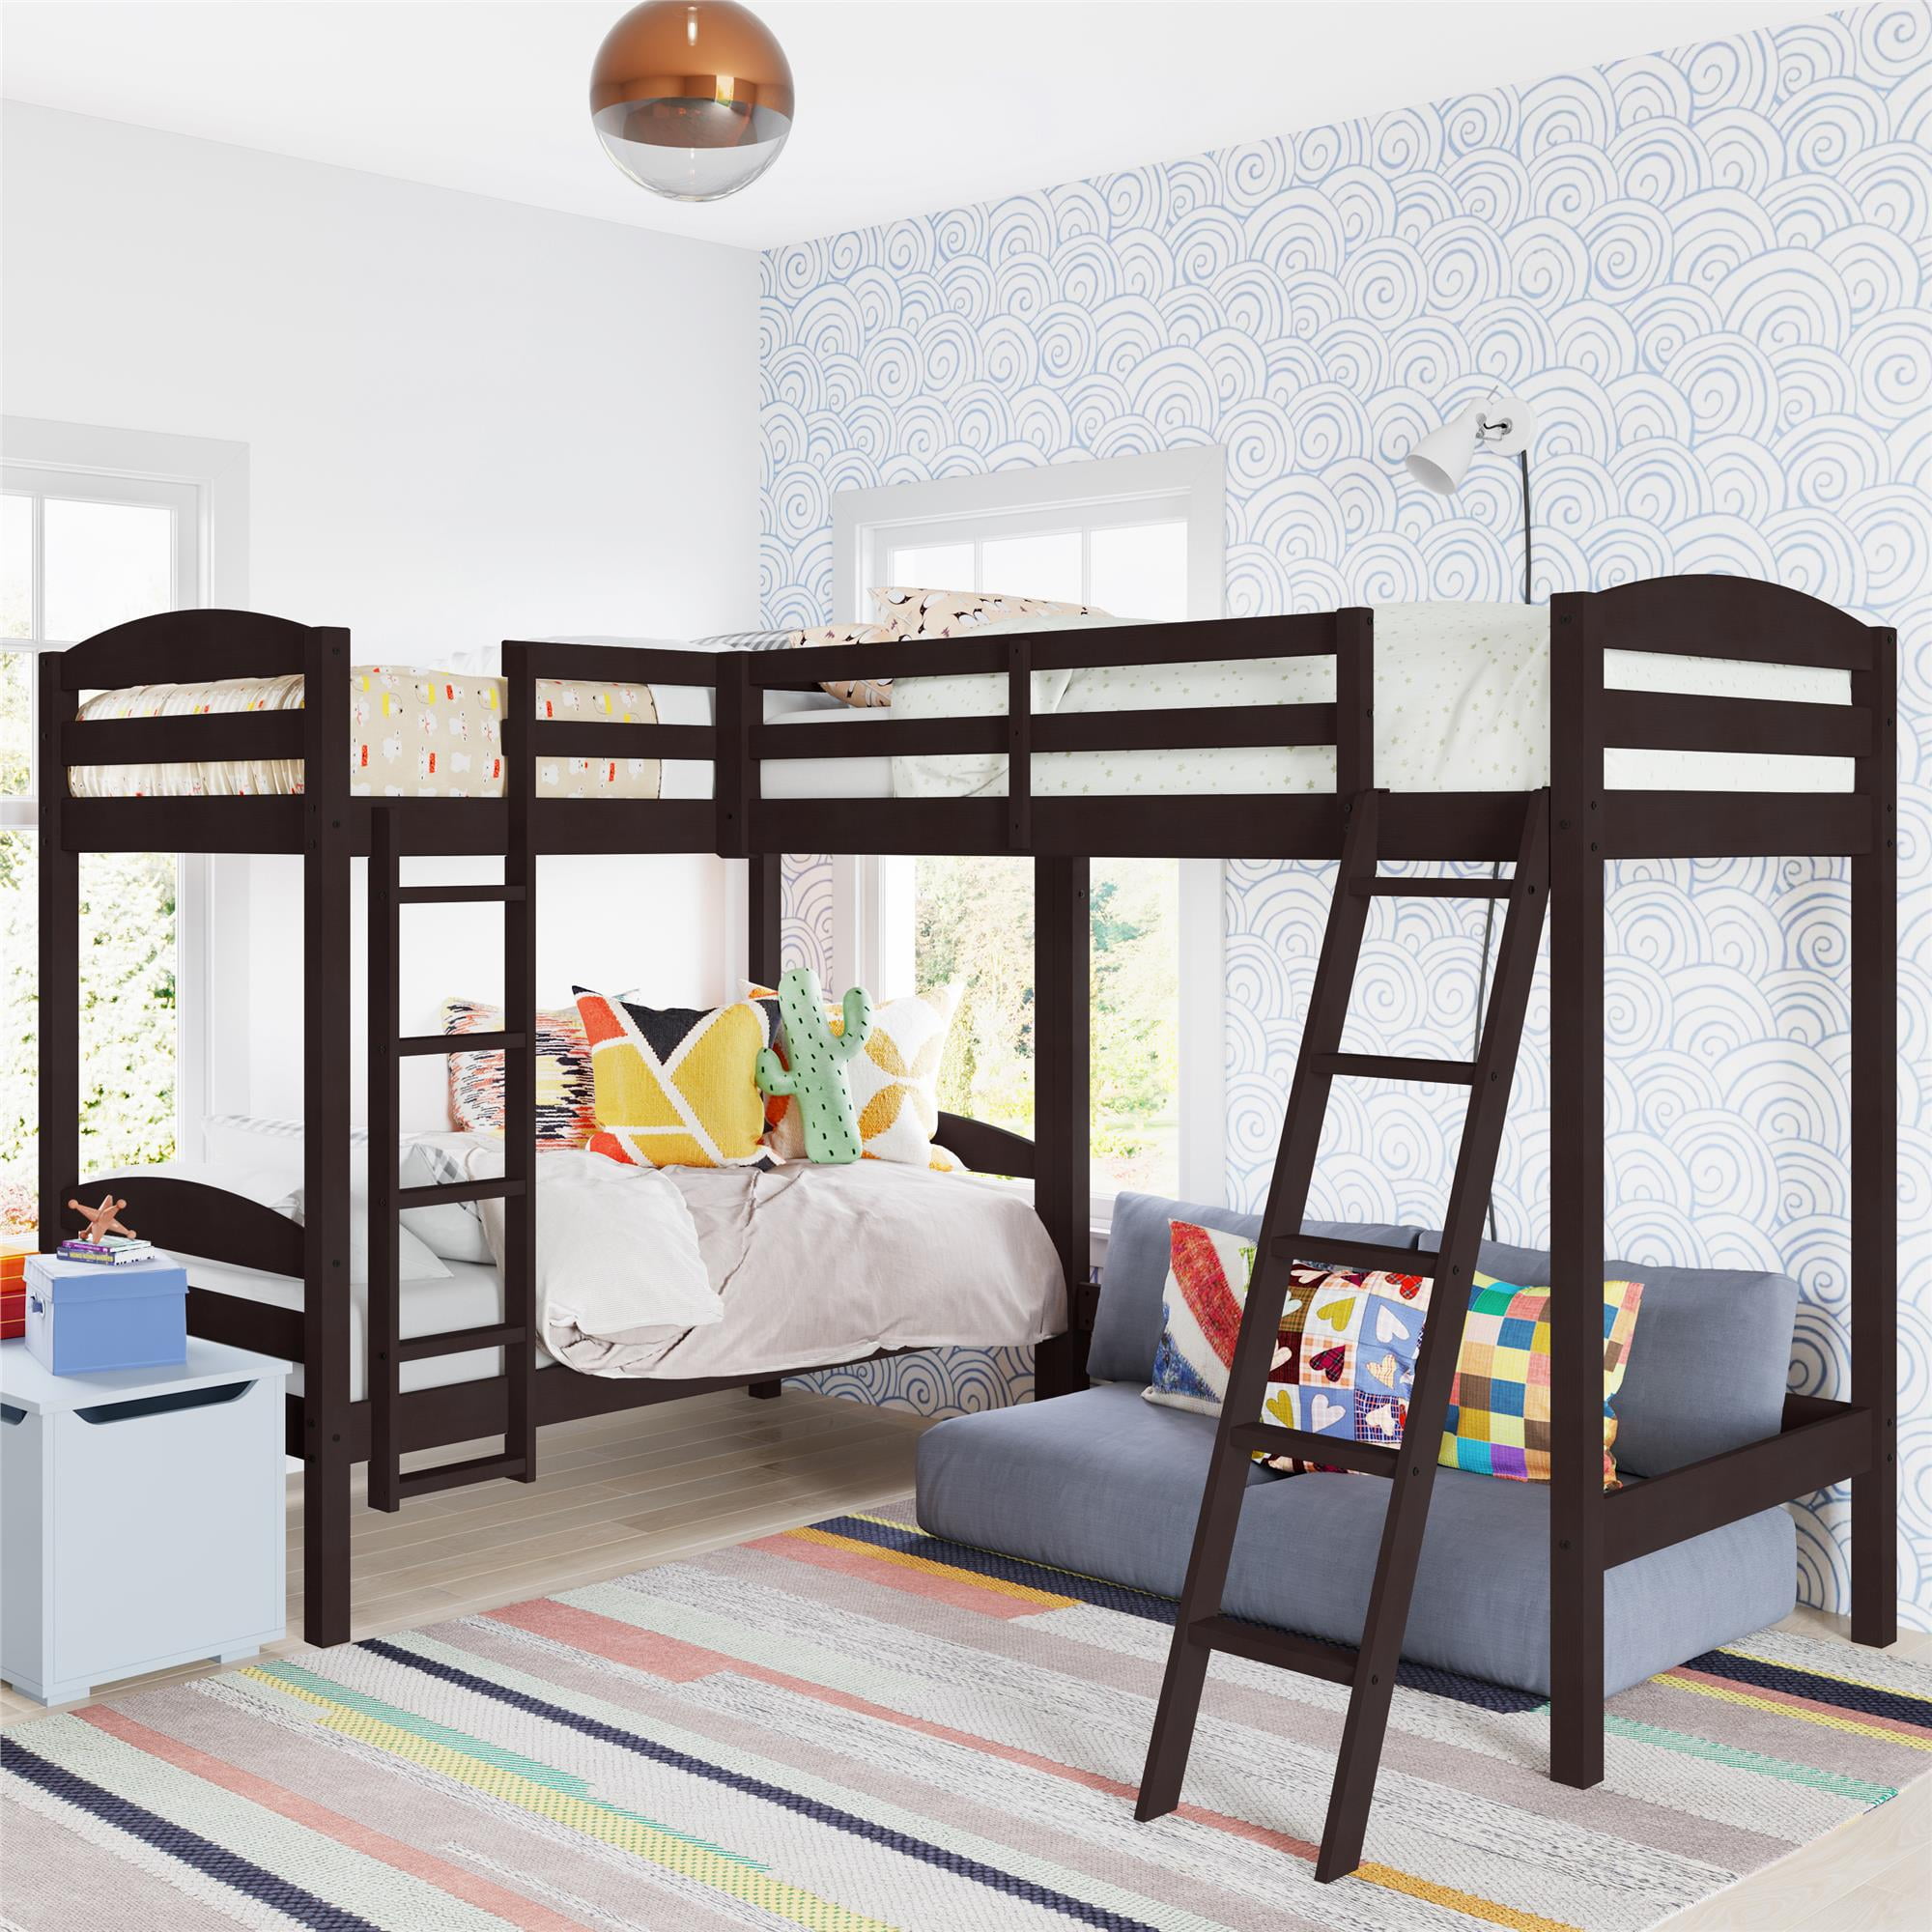 Better Homes & Gardens Leighton Kids' Wood Triple Bunk Bed, Twin Size ...